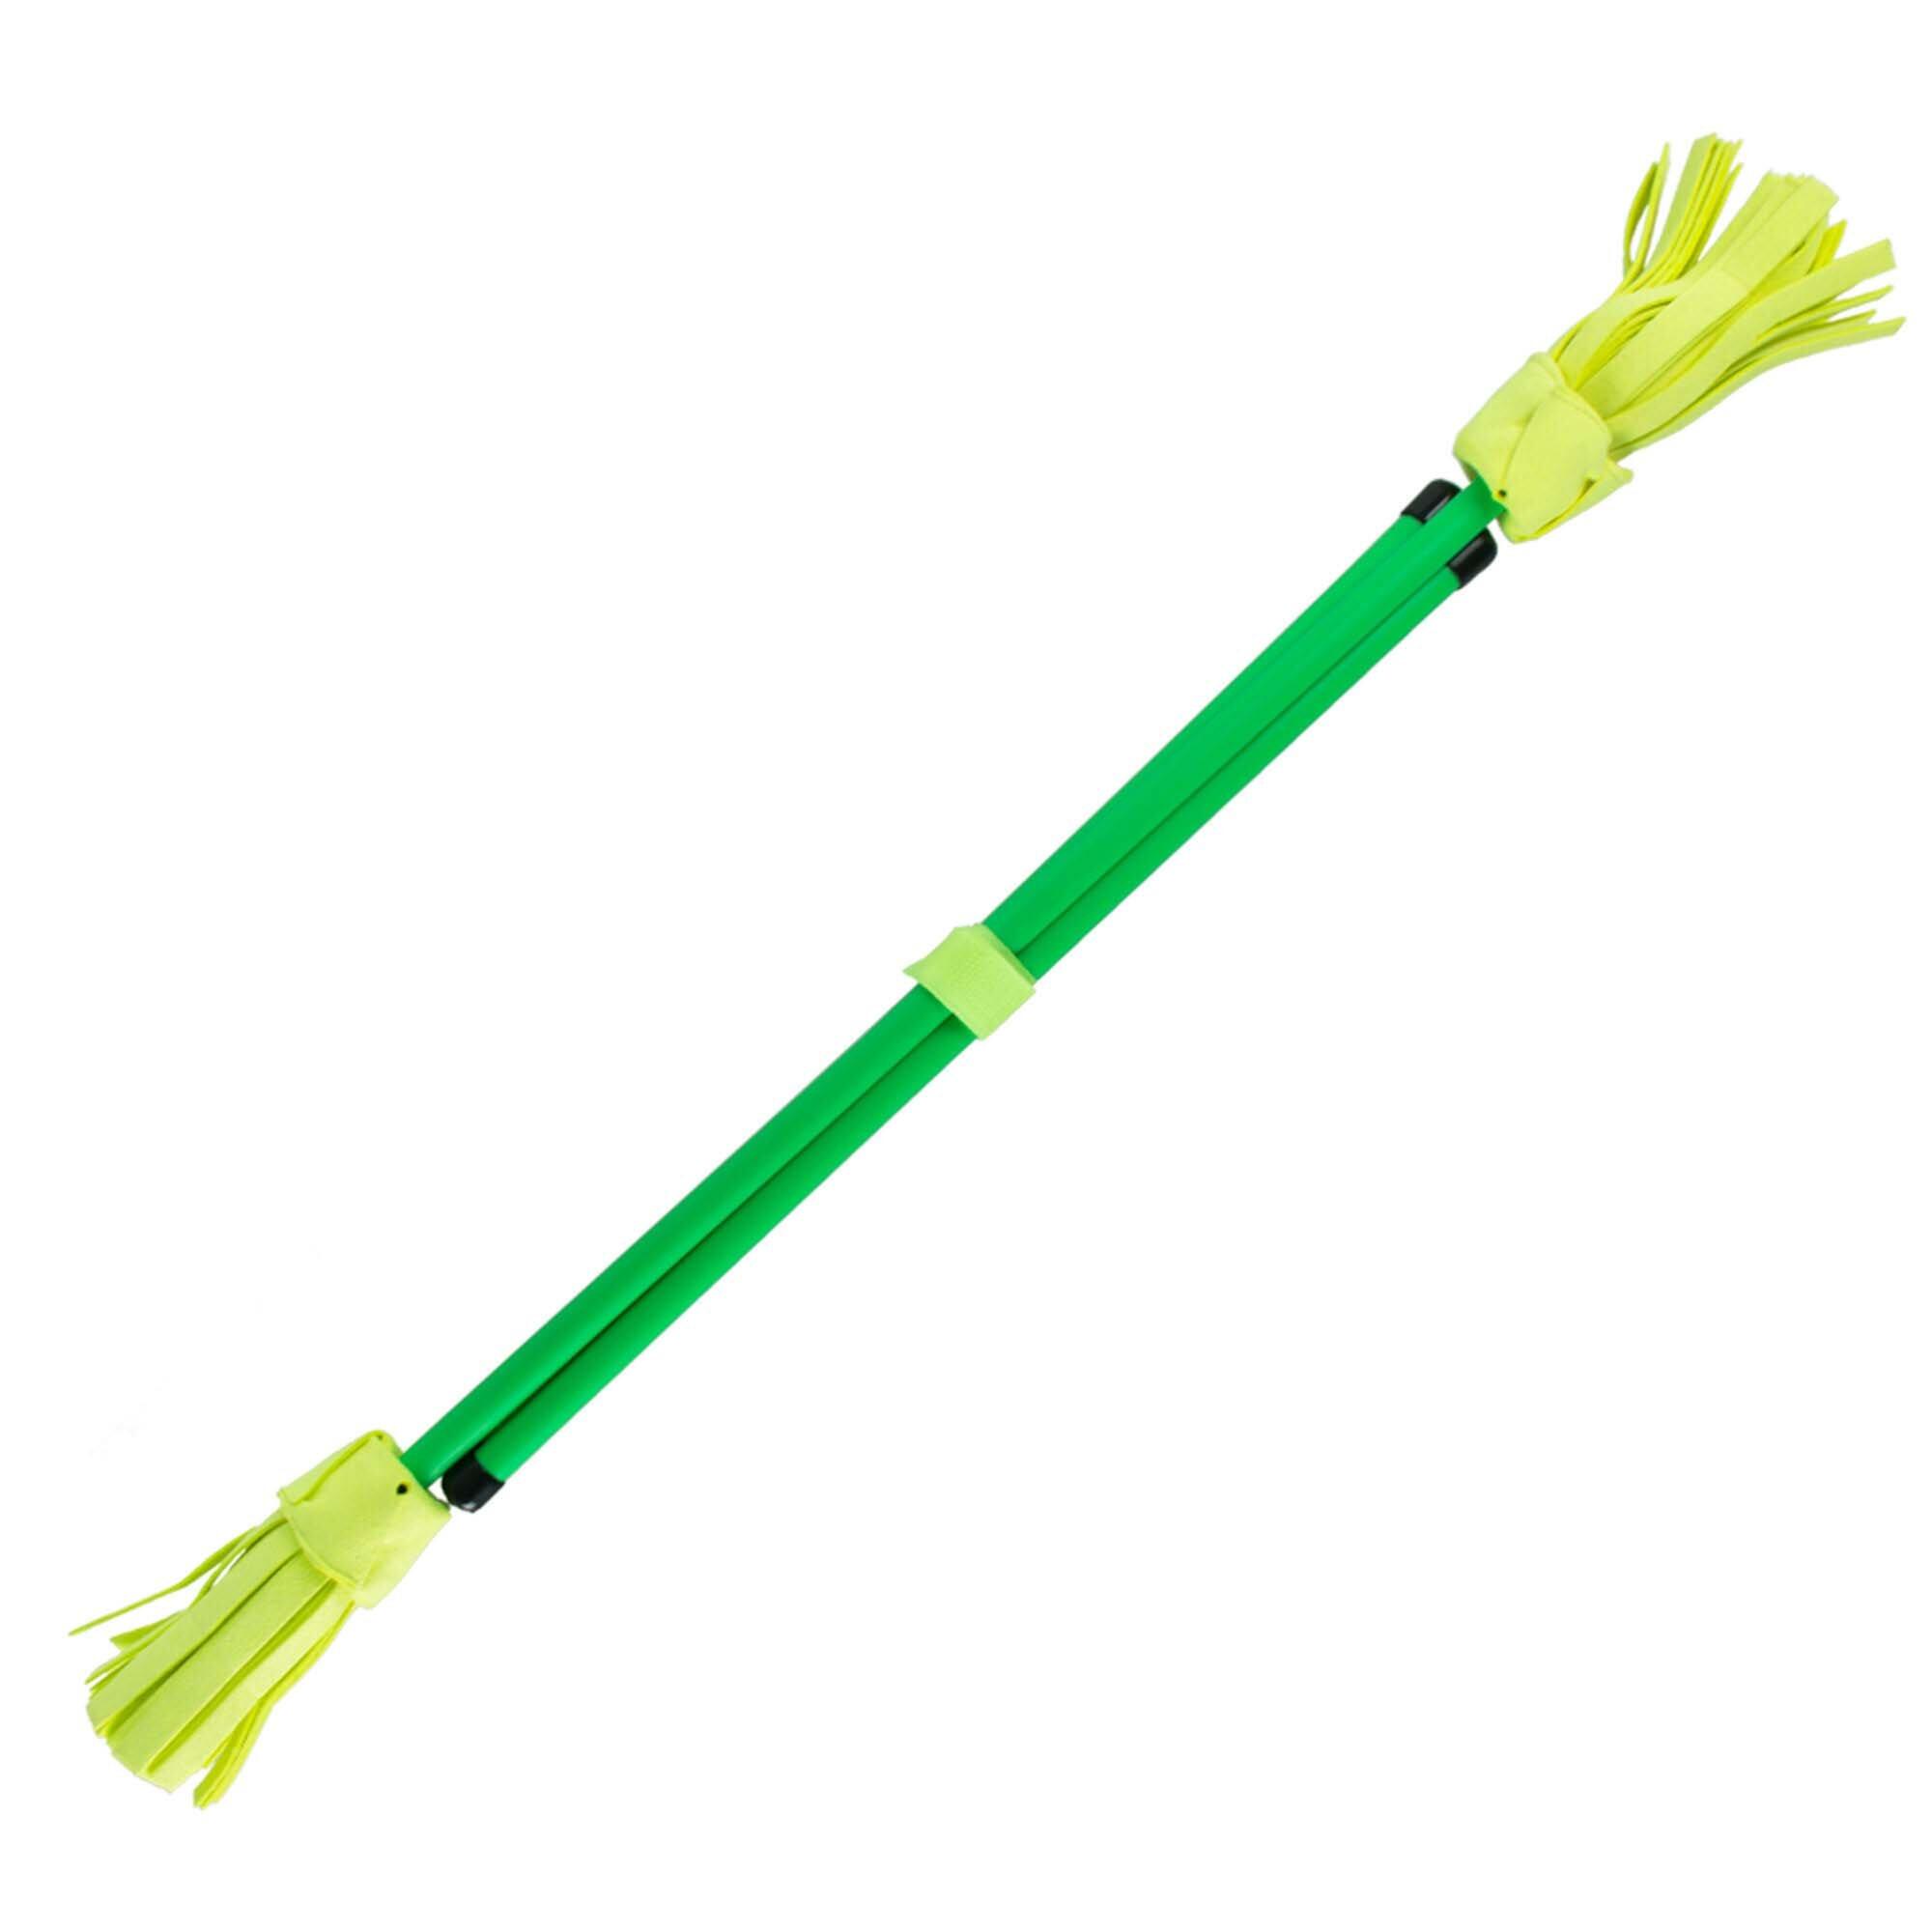 Neo Fluoro Flower Stick and Hand Sticks-Green with Yellow Tassels 1/3